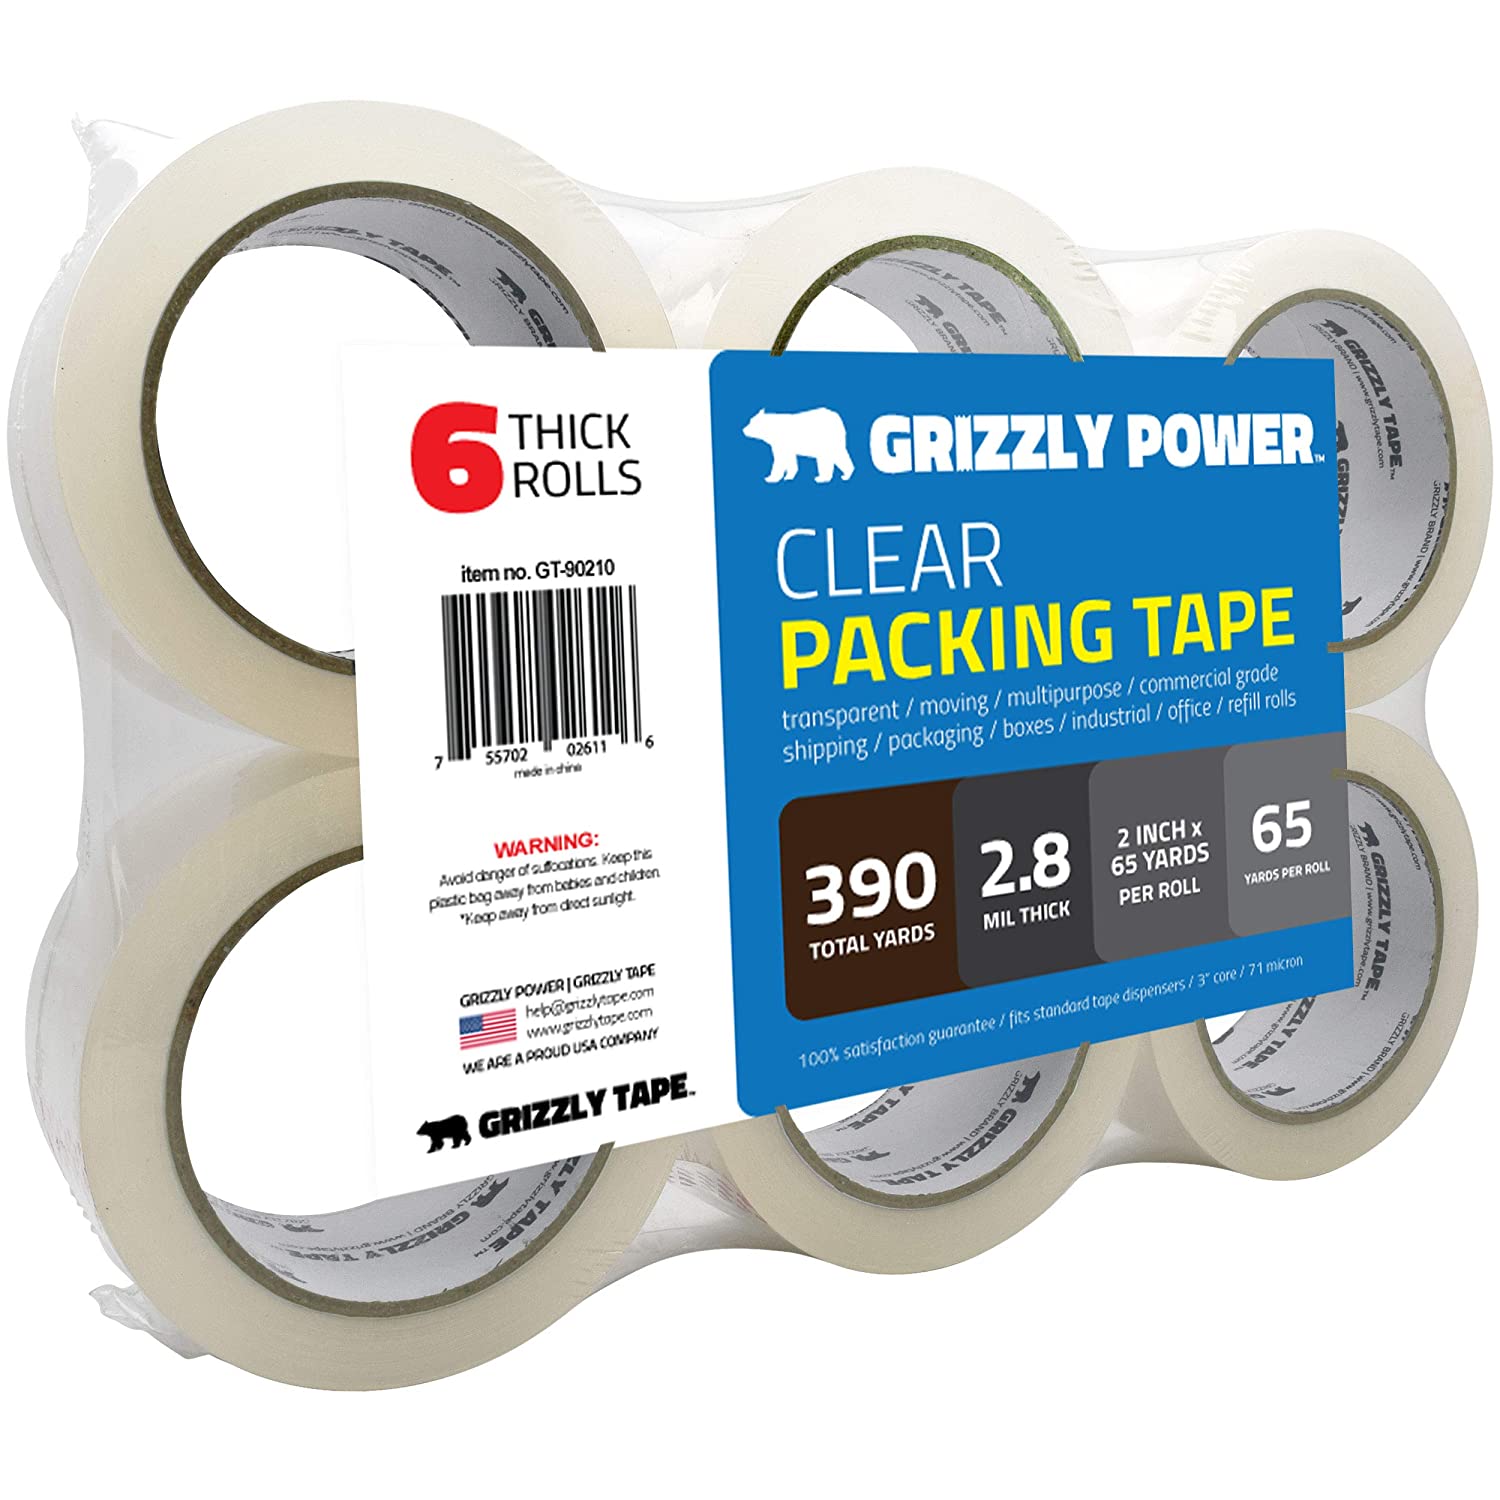 6-Rolls 2" x 65 Yards Grizzly Power Clear Packing Tape $11.83 + Free Shipping w/ Prime or on $25+